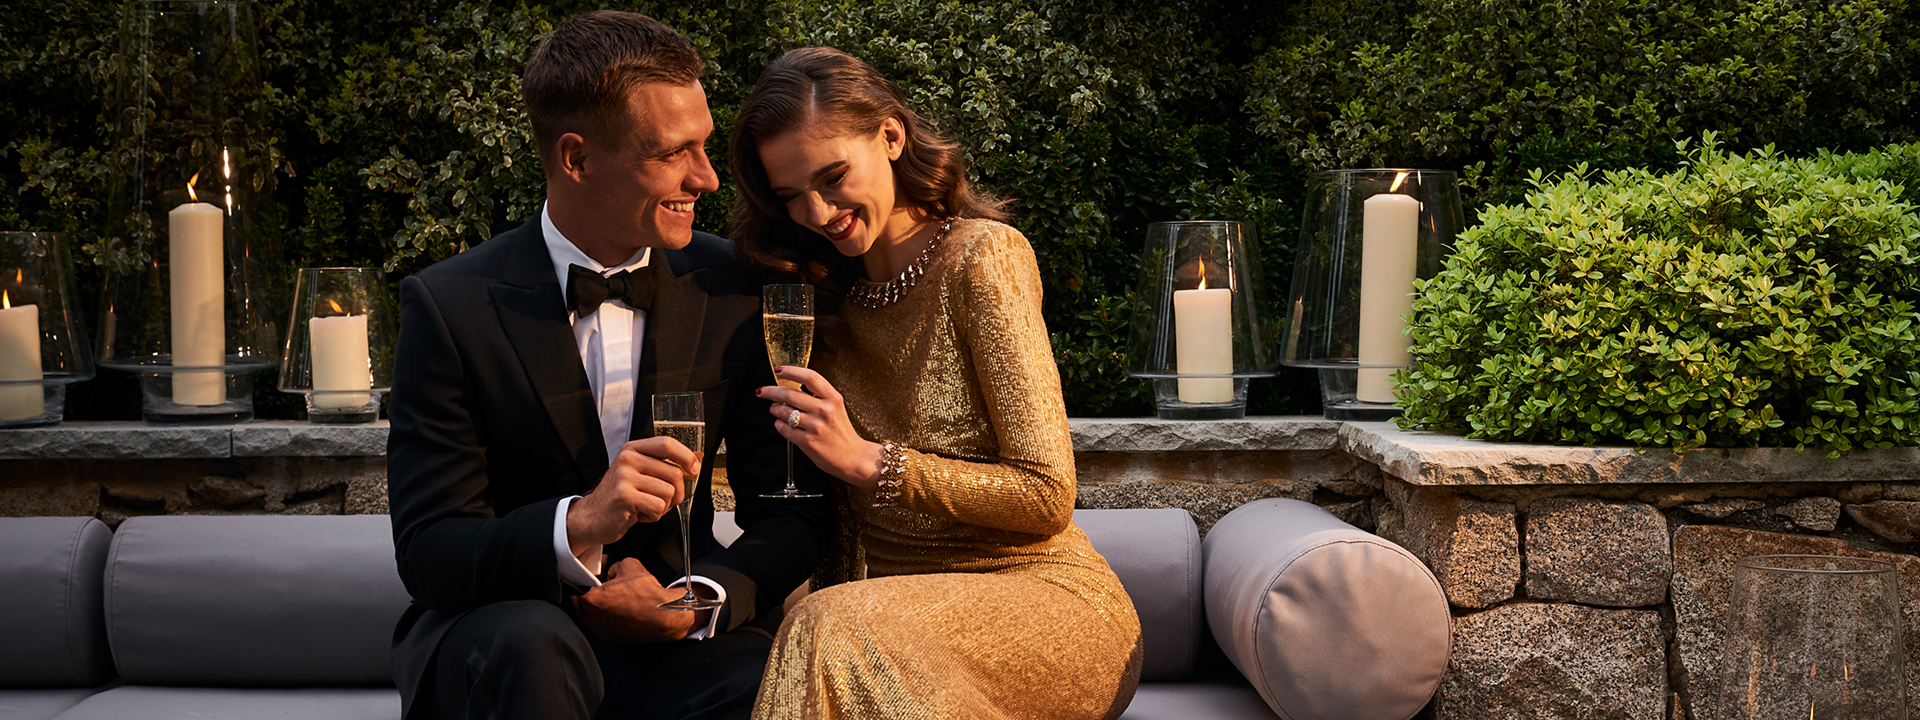 Social occasions at The Berkeley. This image shows a man and woman in formal wear sitting down outside. They are next to each other and smiling, both are holding a glass of Champagne.